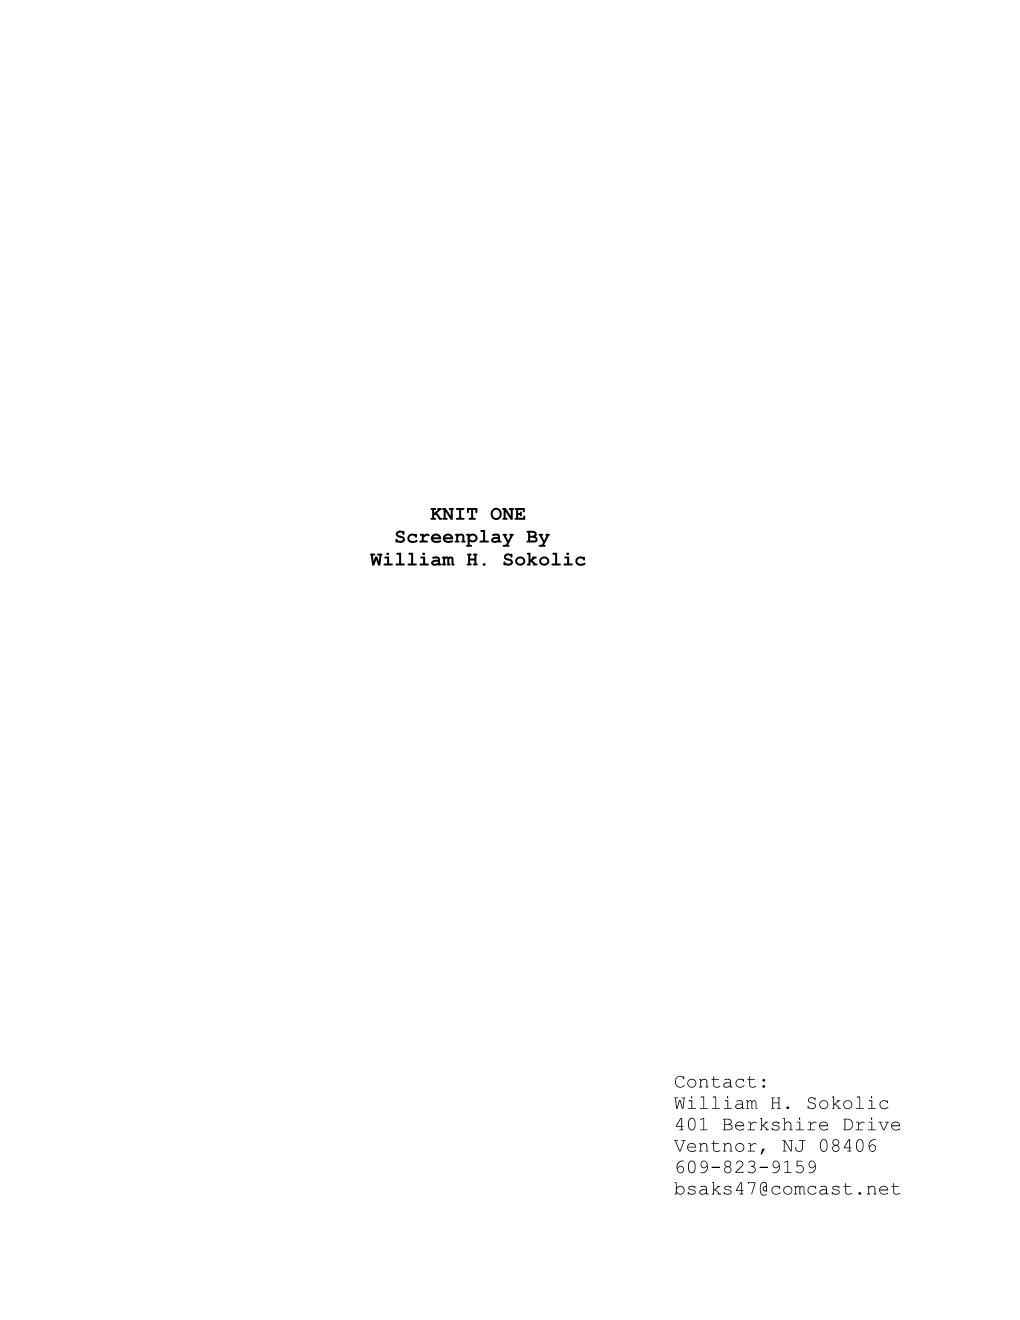 KNIT ONE Screenplay by William H